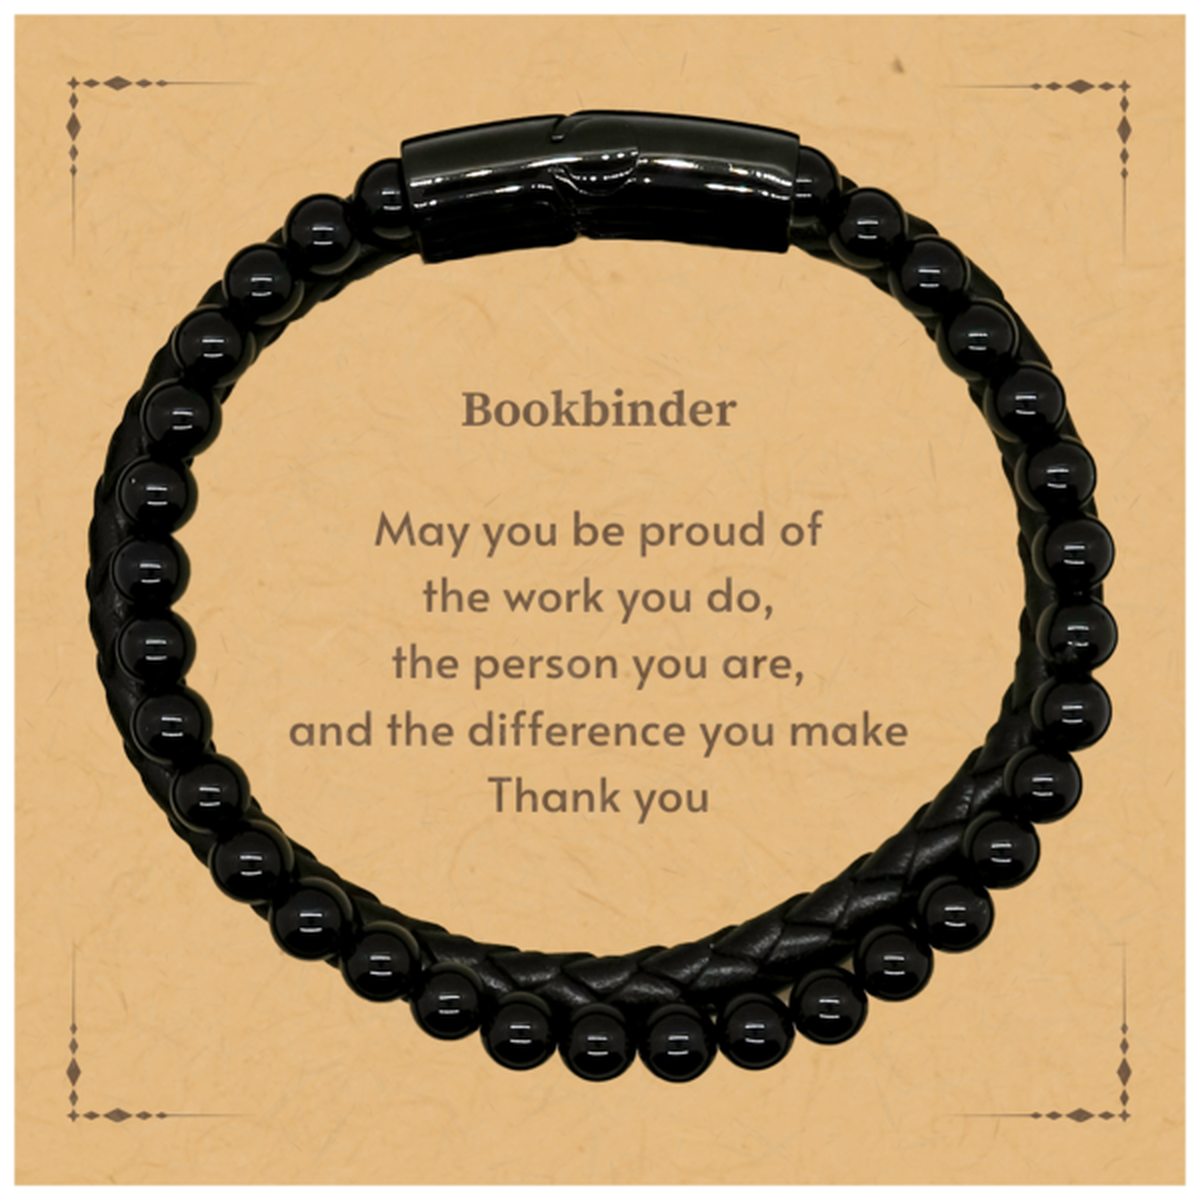 Heartwarming Stone Leather Bracelets Retirement Coworkers Gifts for Bookbinder, Bookbinder May You be proud of the work you do, the person you are Gifts for Boss Men Women Friends